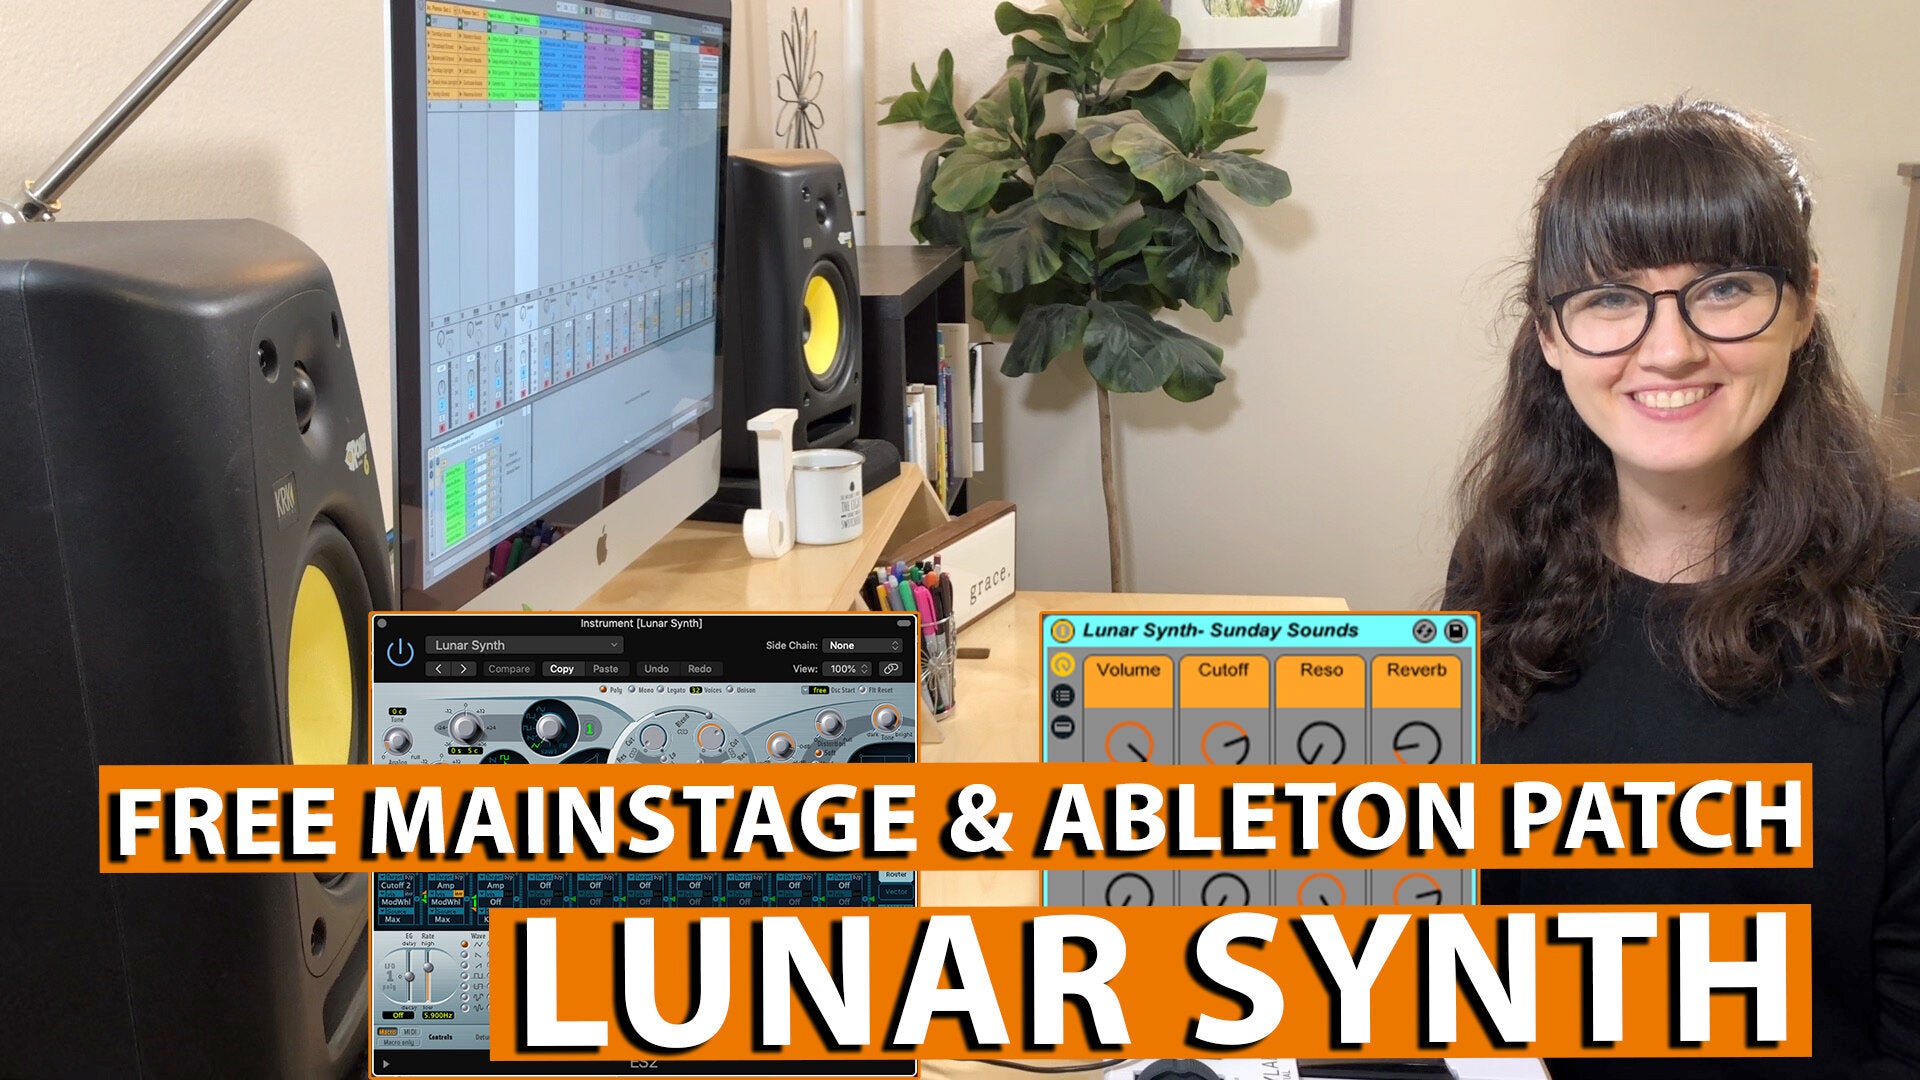 Free MainStage & Ableton Worship Patch! - Lunar Synth